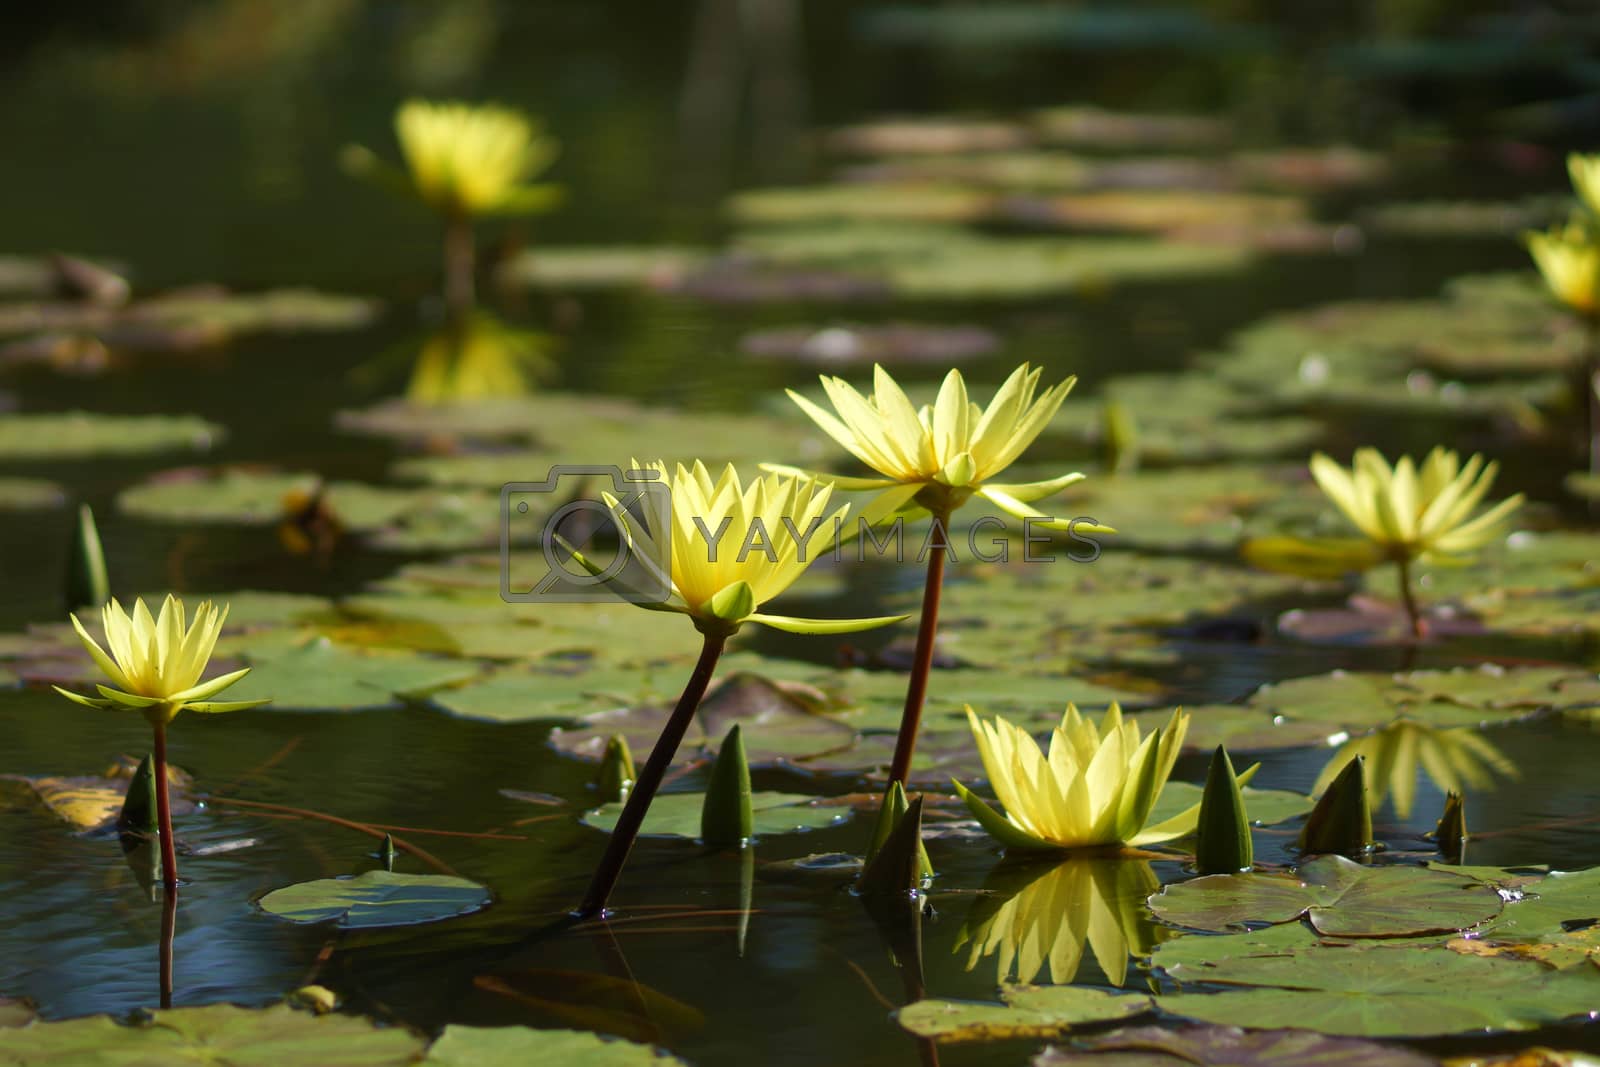 Royalty free image of beautiful waterlily or lotus flower by Noppharat_th